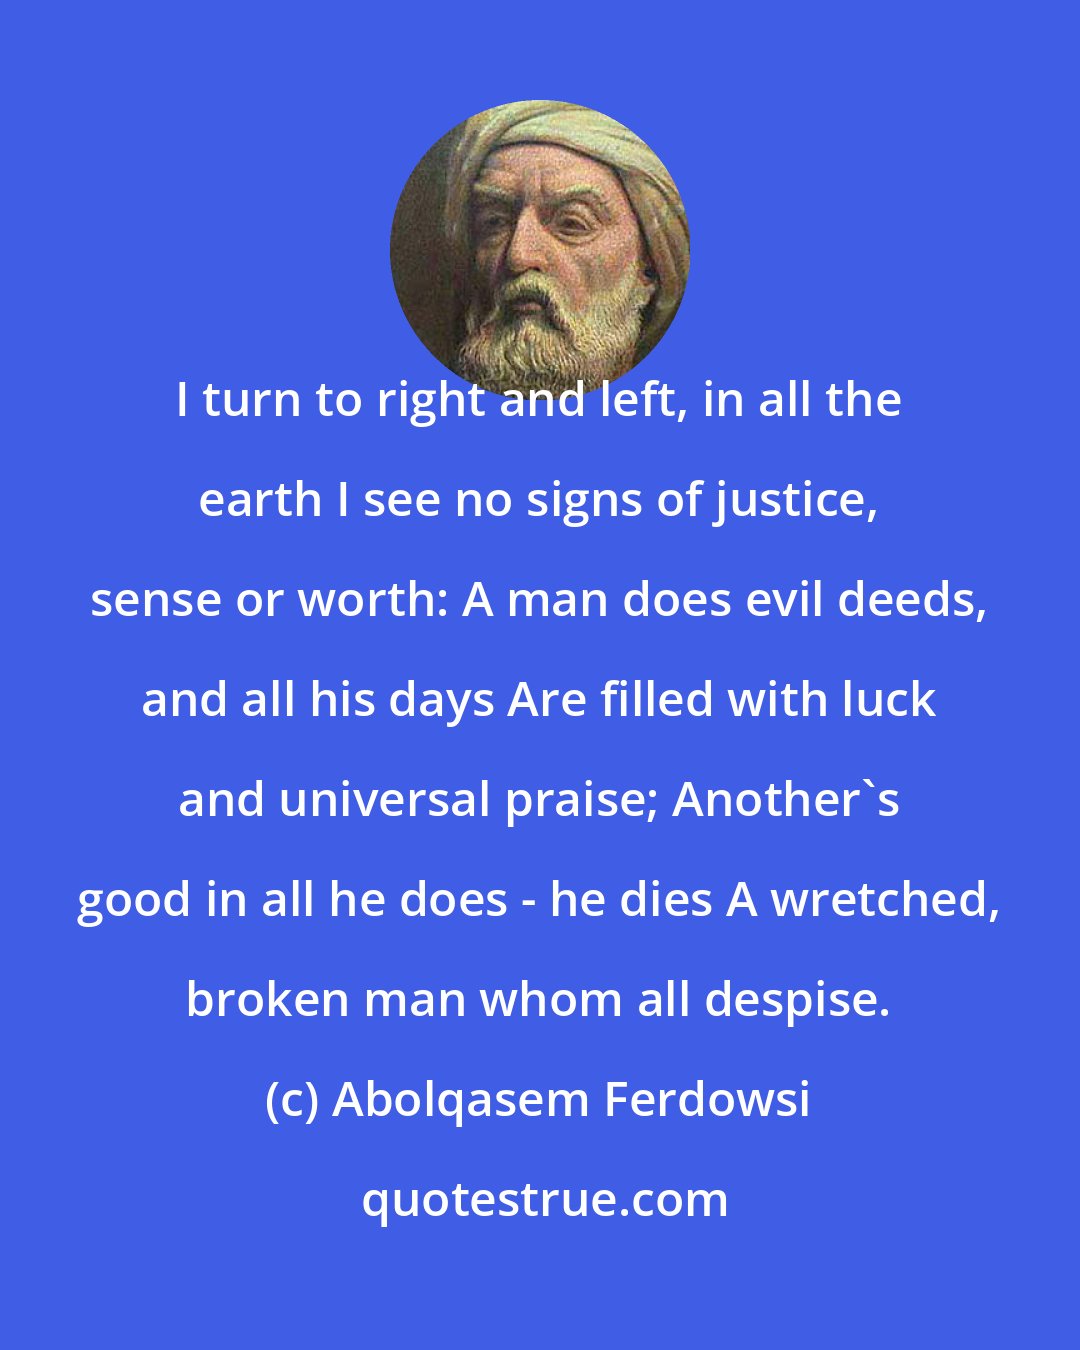 Abolqasem Ferdowsi: I turn to right and left, in all the earth I see no signs of justice, sense or worth: A man does evil deeds, and all his days Are filled with luck and universal praise; Another's good in all he does - he dies A wretched, broken man whom all despise.